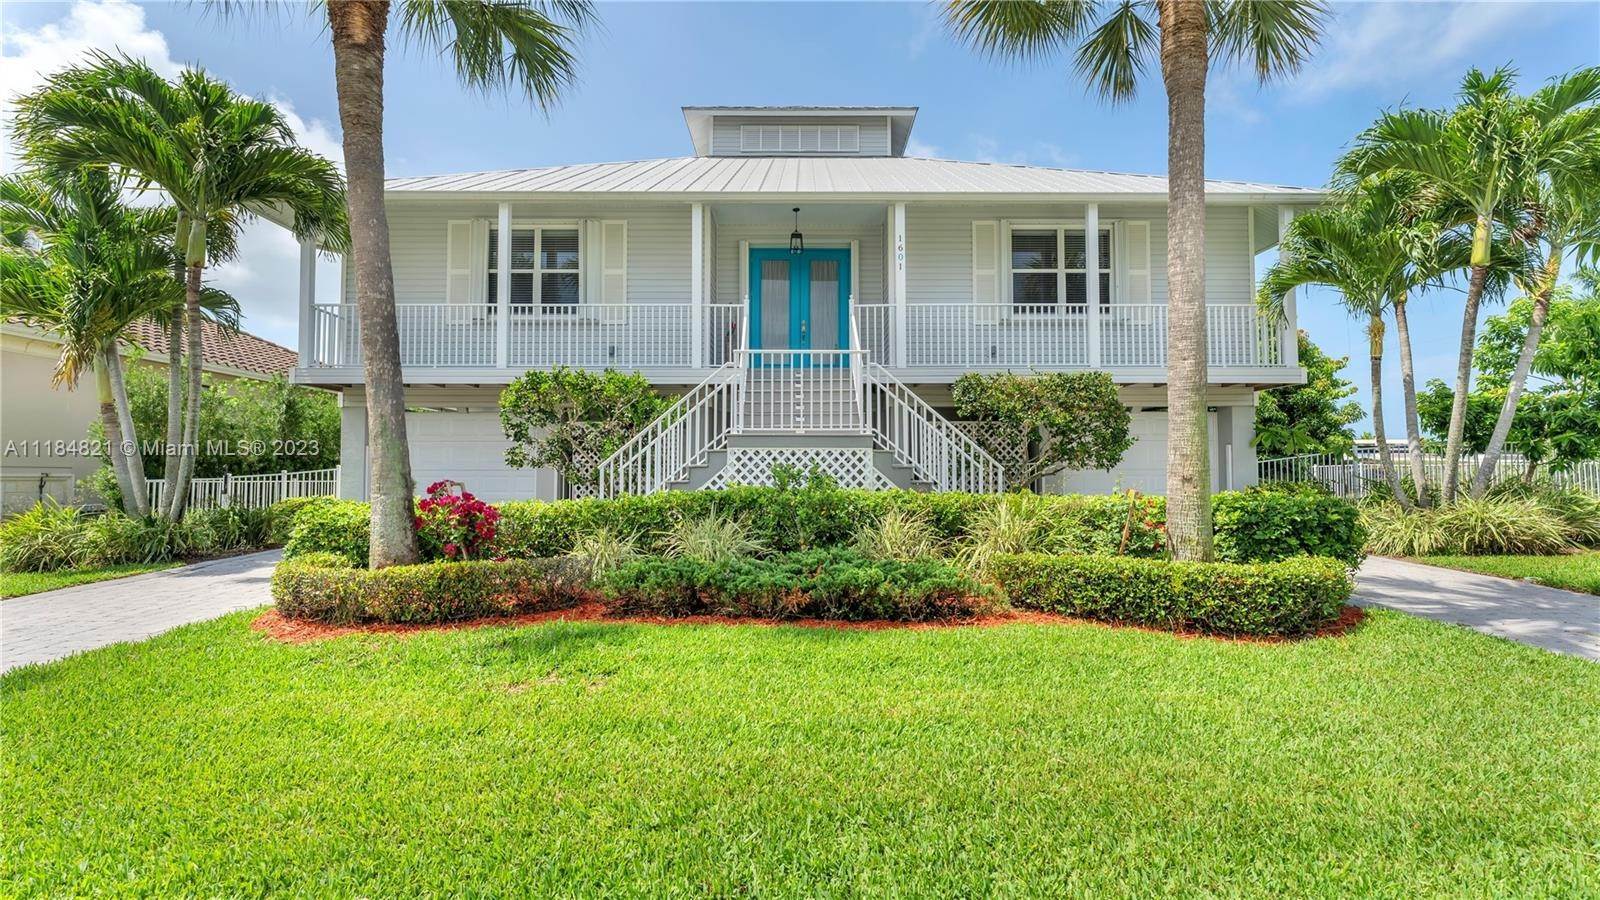 22. Single Family at Address Not Available Marco Island, FL 34145